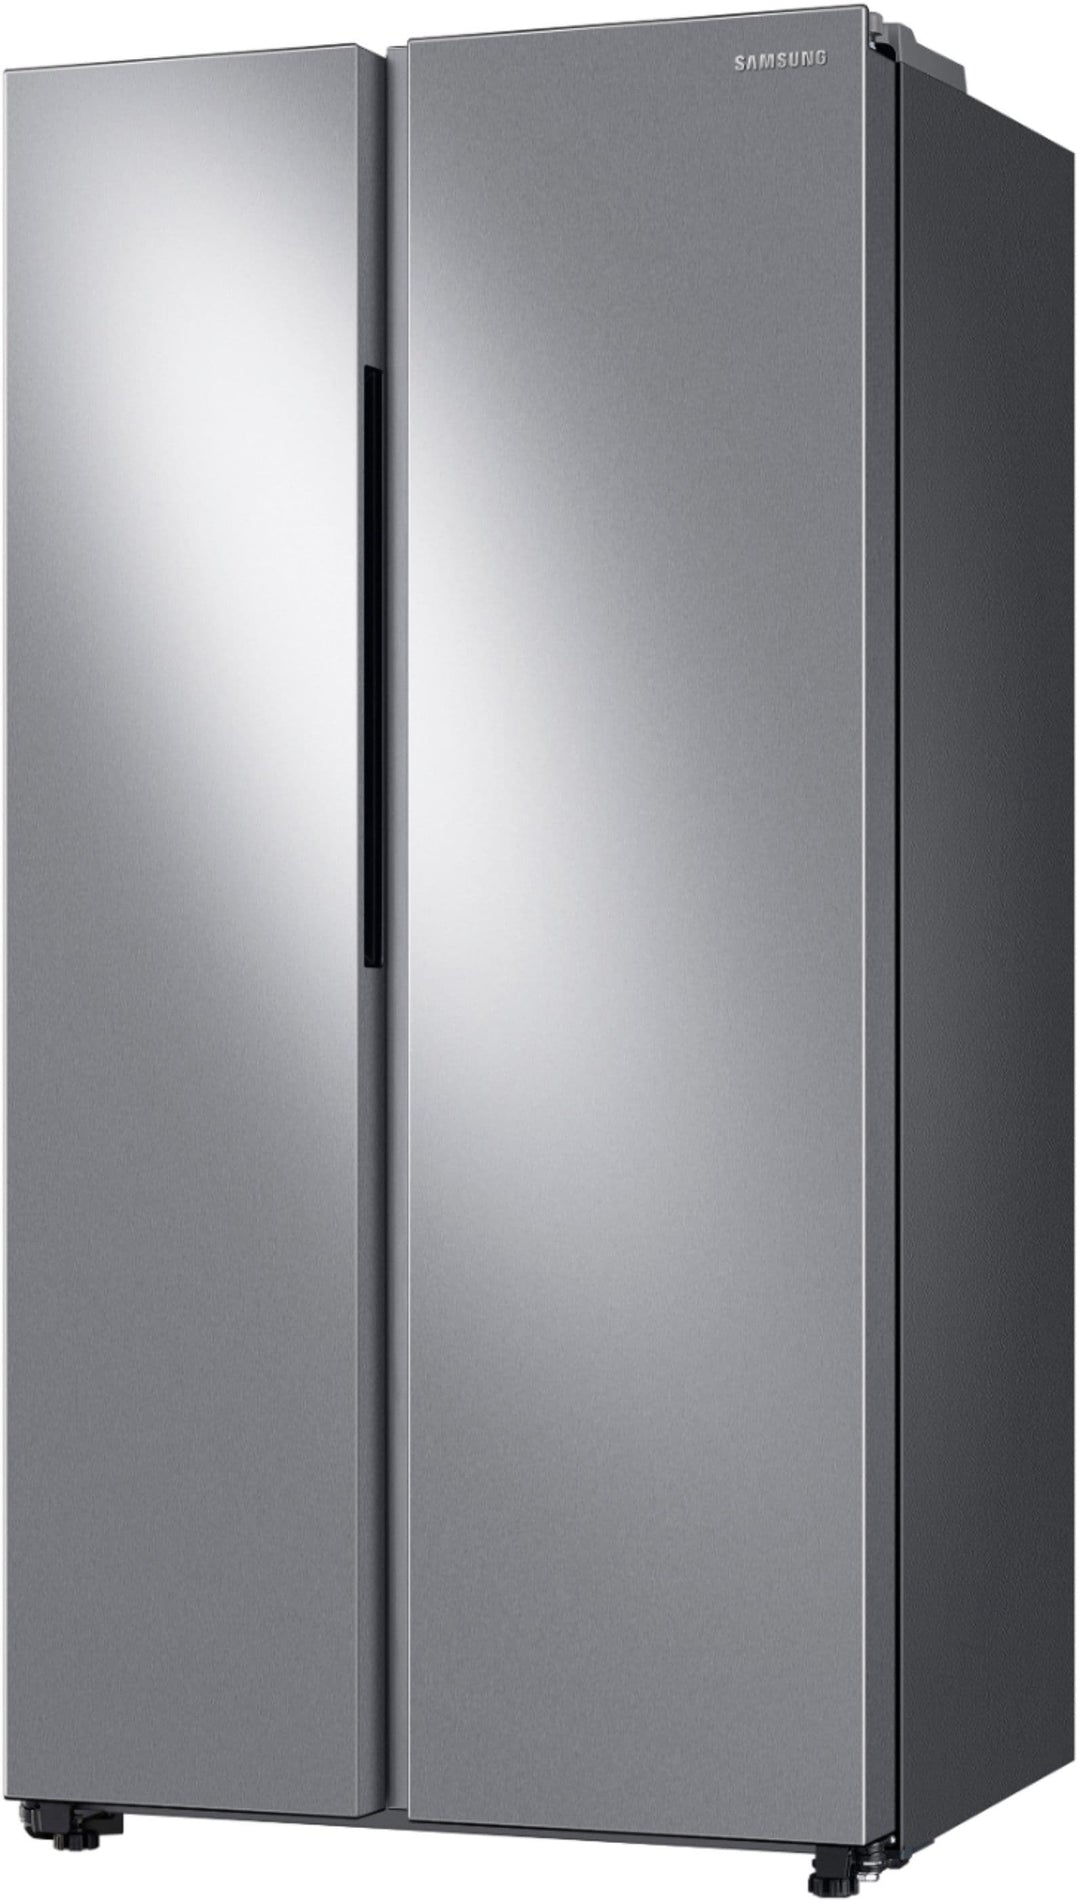 Samsung - 23 cu. ft. Counter Depth Side-by-Side Refrigerator with WiFi and All-Around Cooling - Stainless steel_6